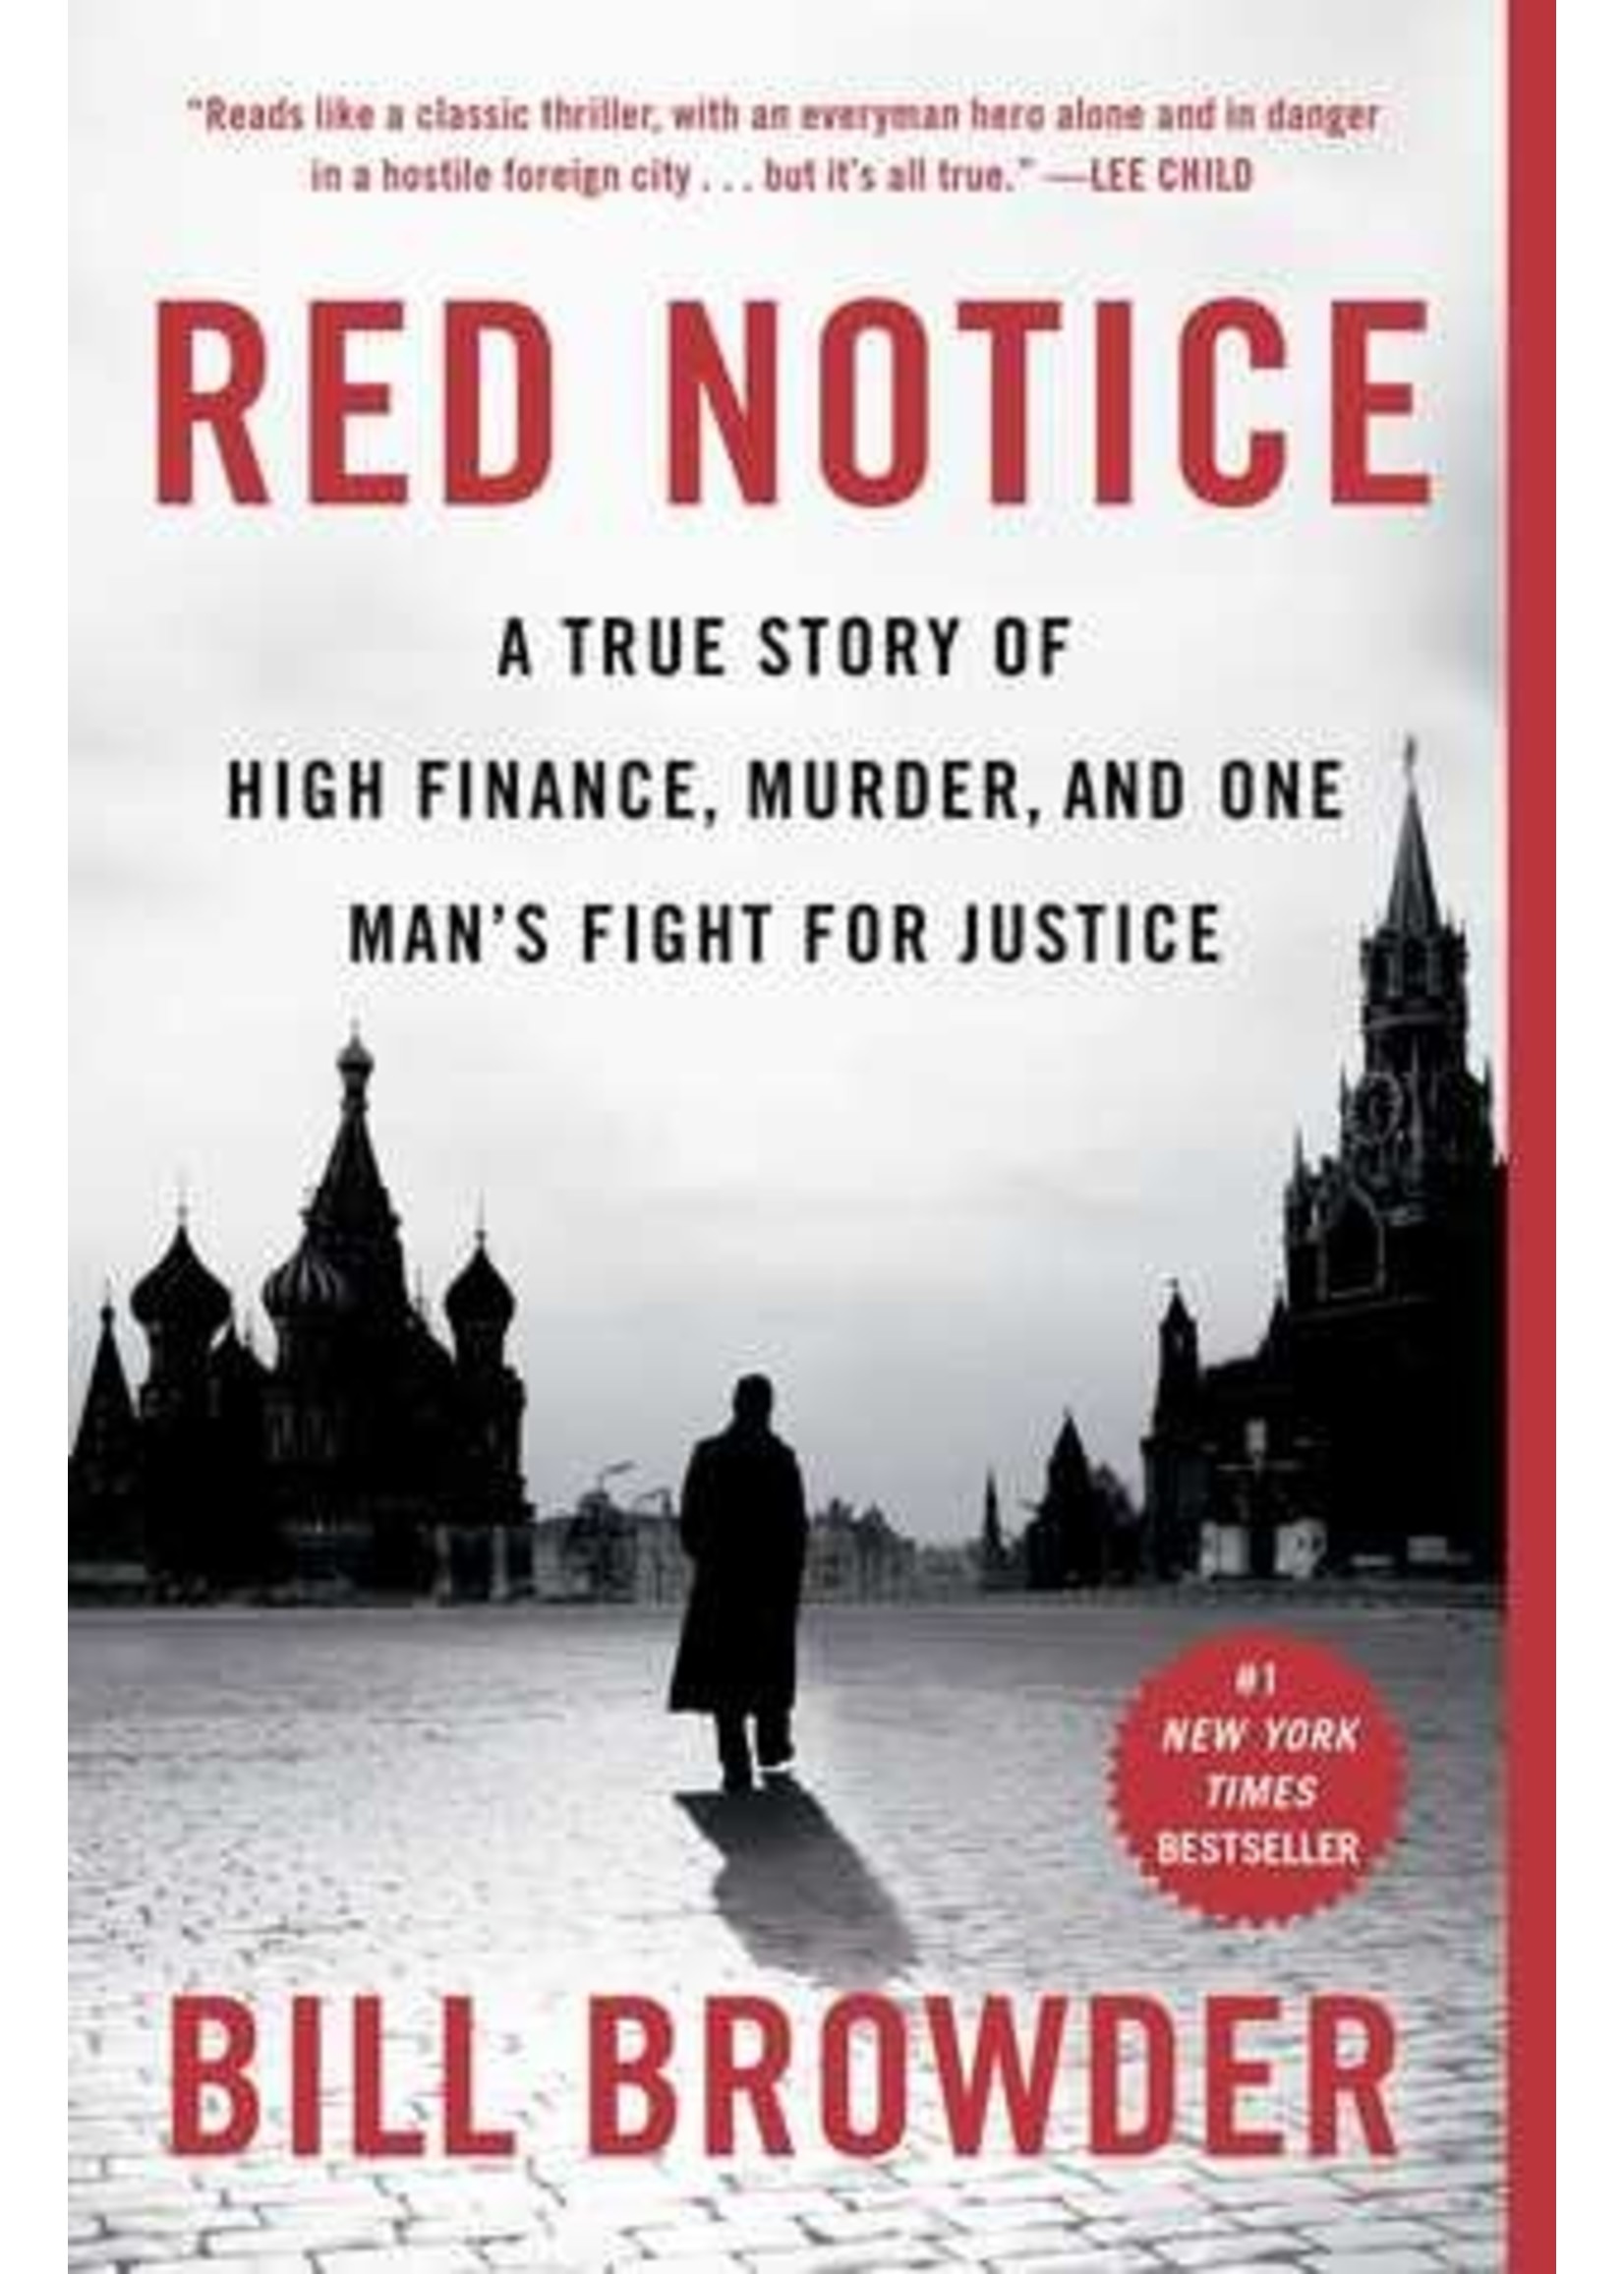 Red Notice: A True Story of High Finance, Murder, and One Man's Fight for Justice by Bill Browder